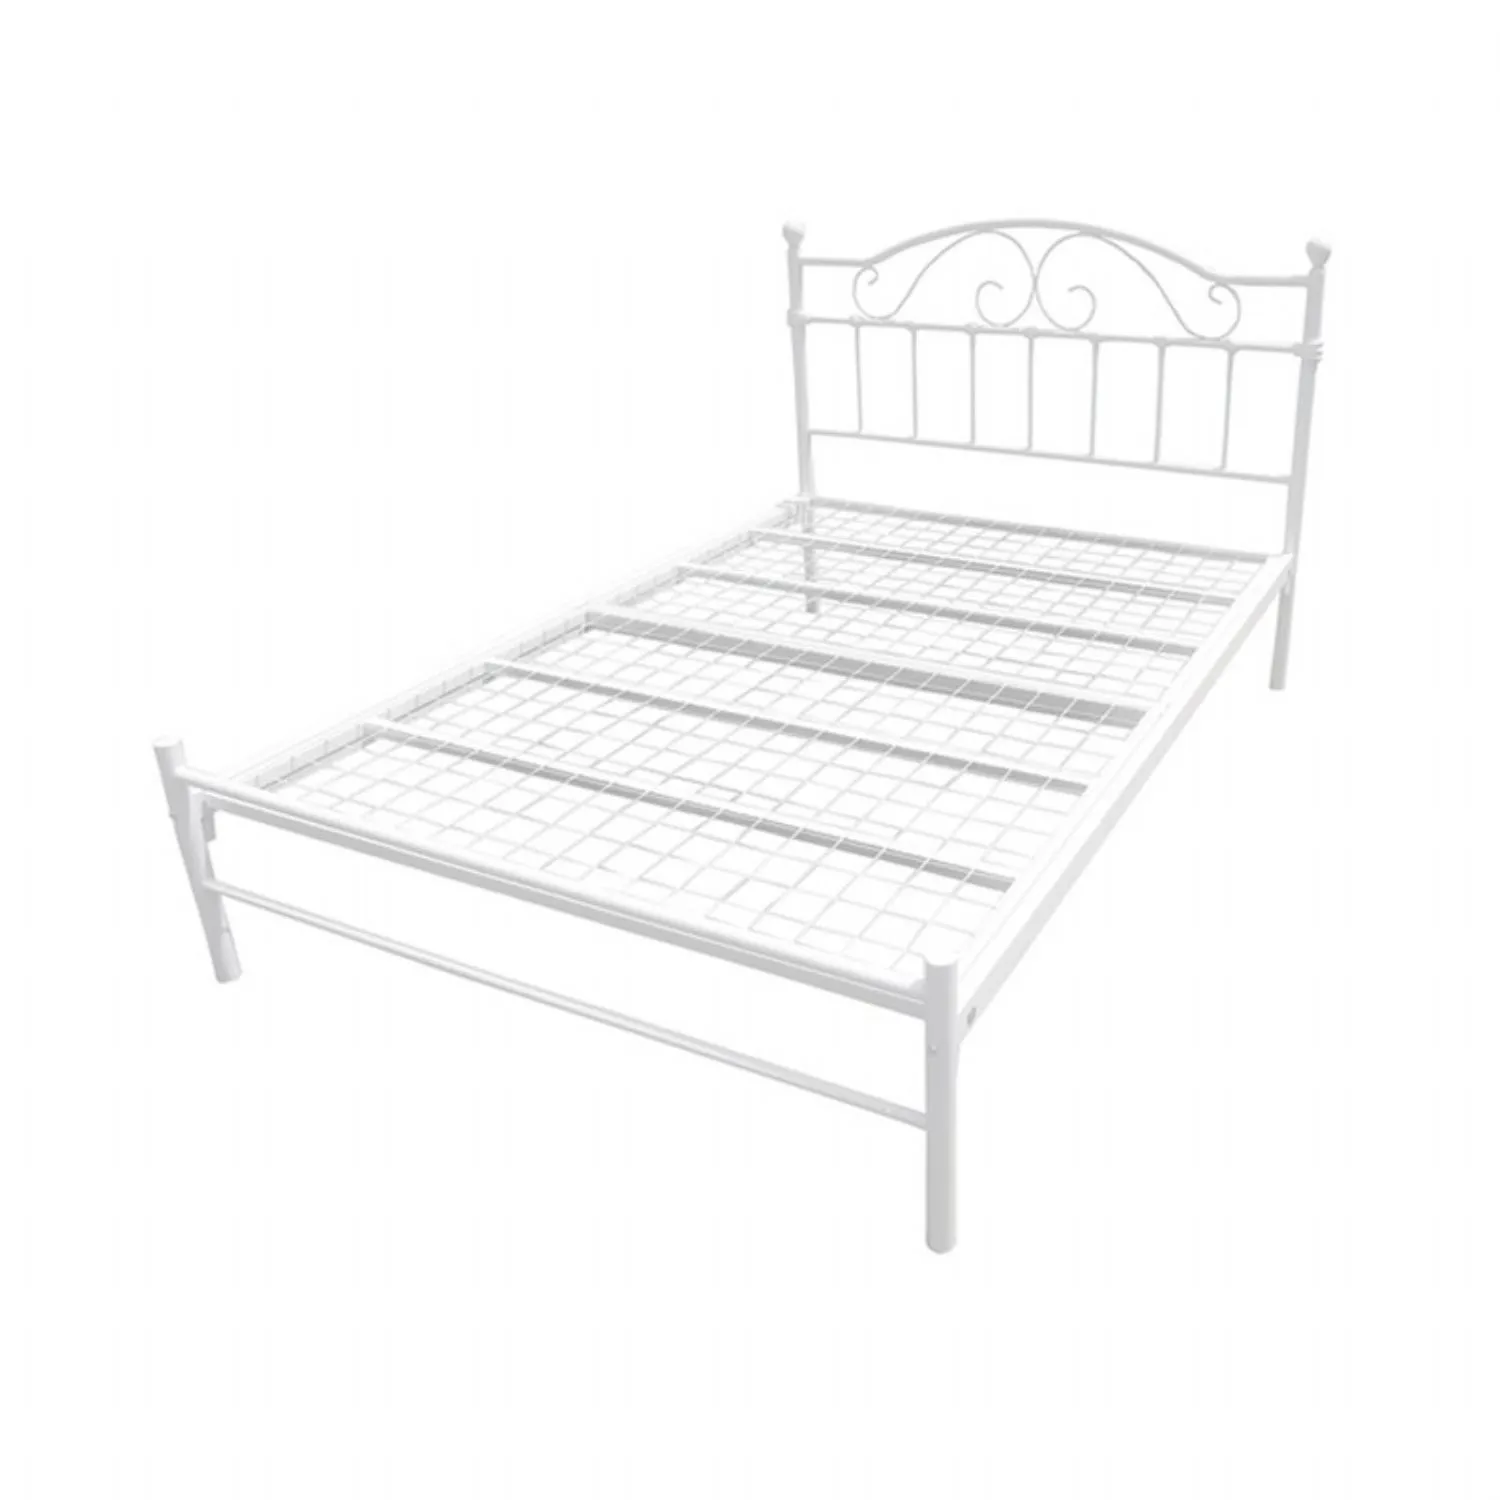 White Metal Bed Mesh Based Contract 4ft 6